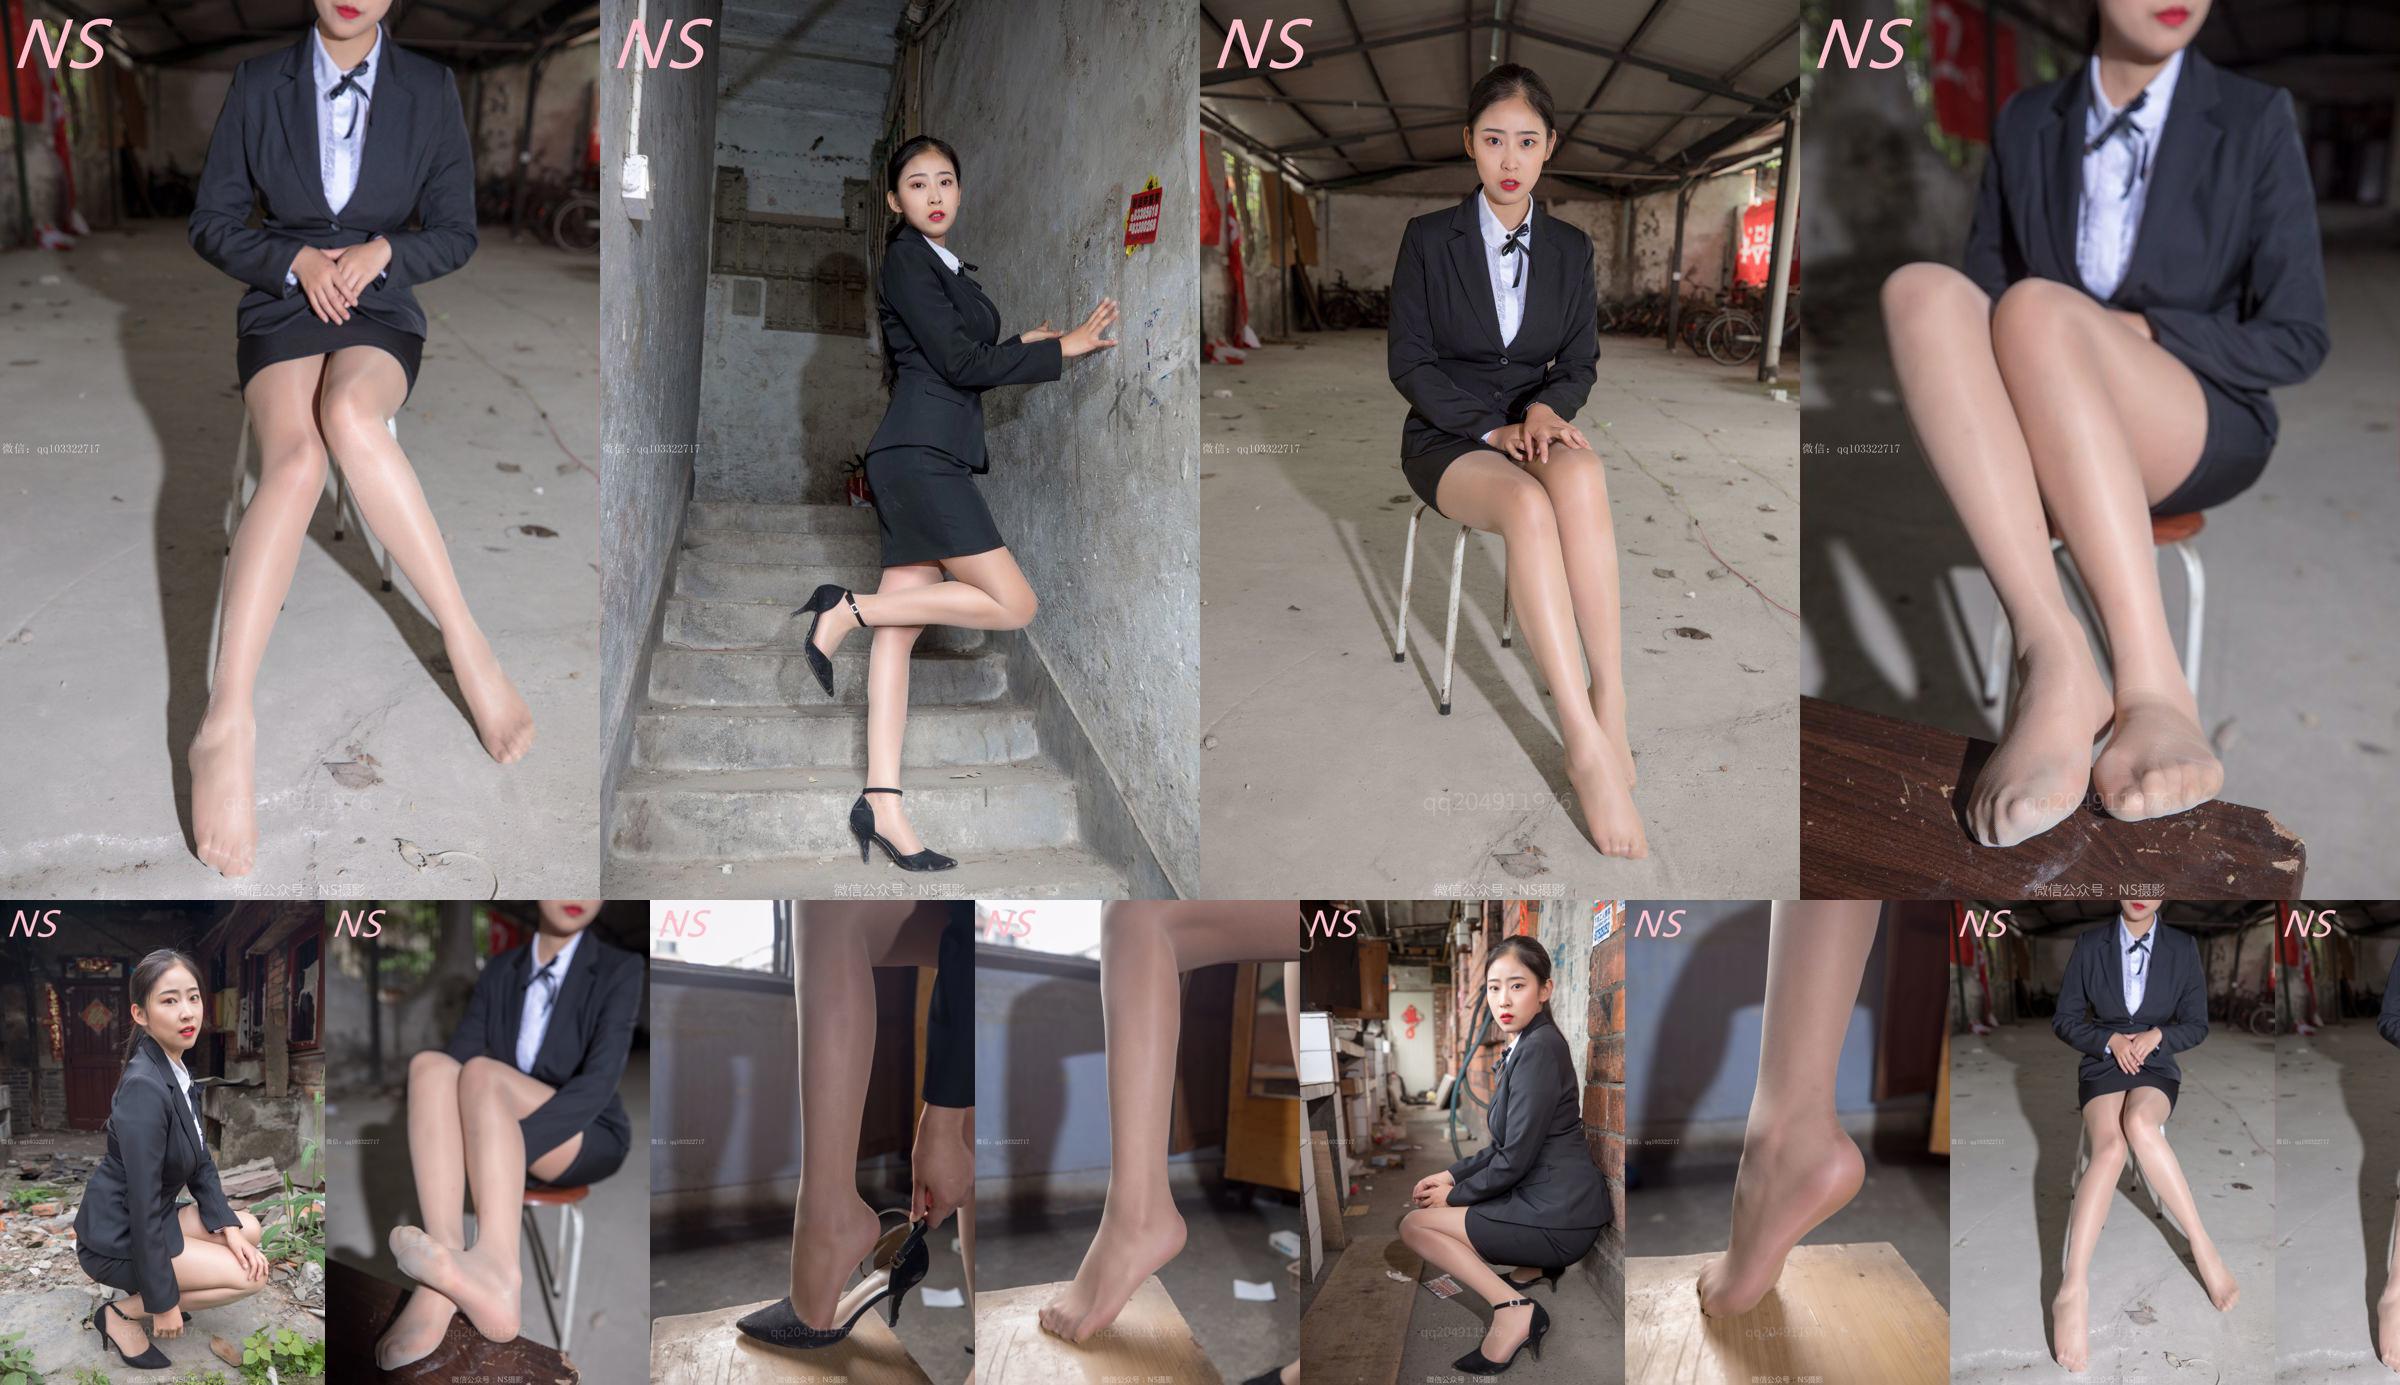 Zhao Xiaochen "Professional Stockings" [Nass Photography] No.6d3f1d Page 2